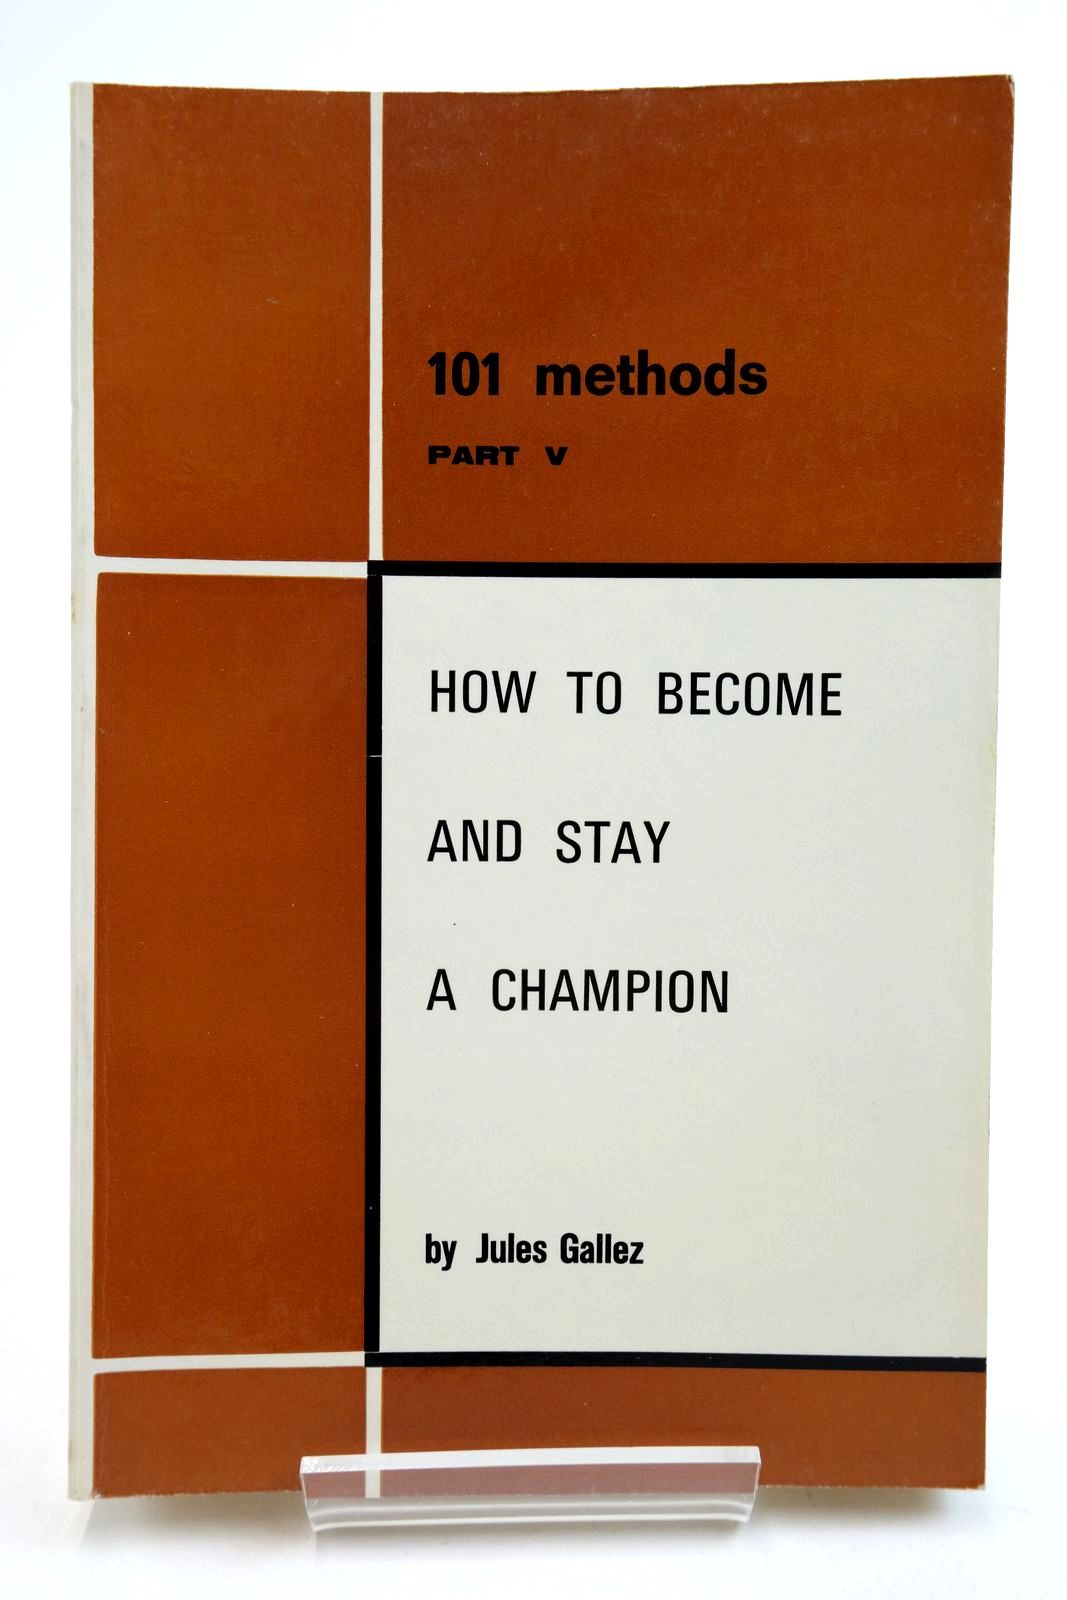 Photo of 101 METHODS PART V HOW TO BECOME AND STAY A CHAMPION- Stock Number: 2134811